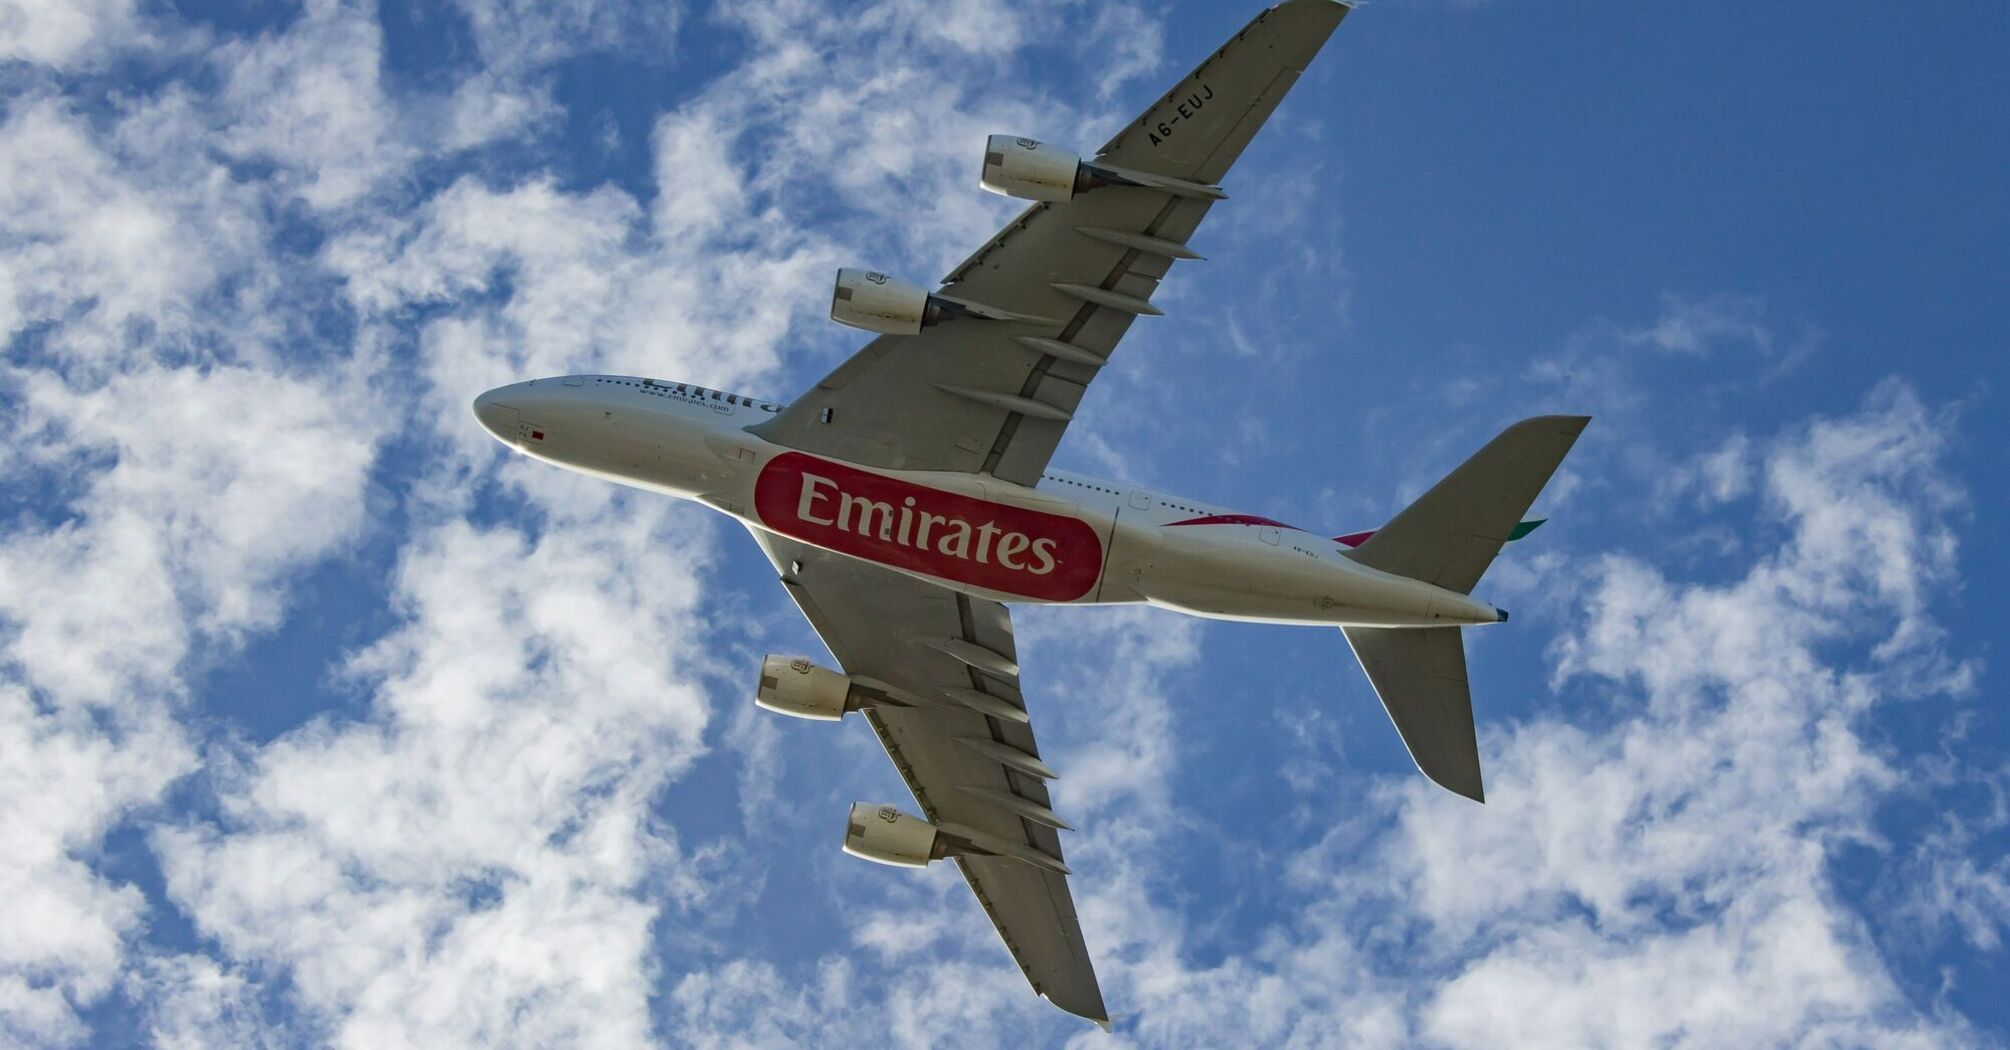 White and red Emirates airplane on mid air